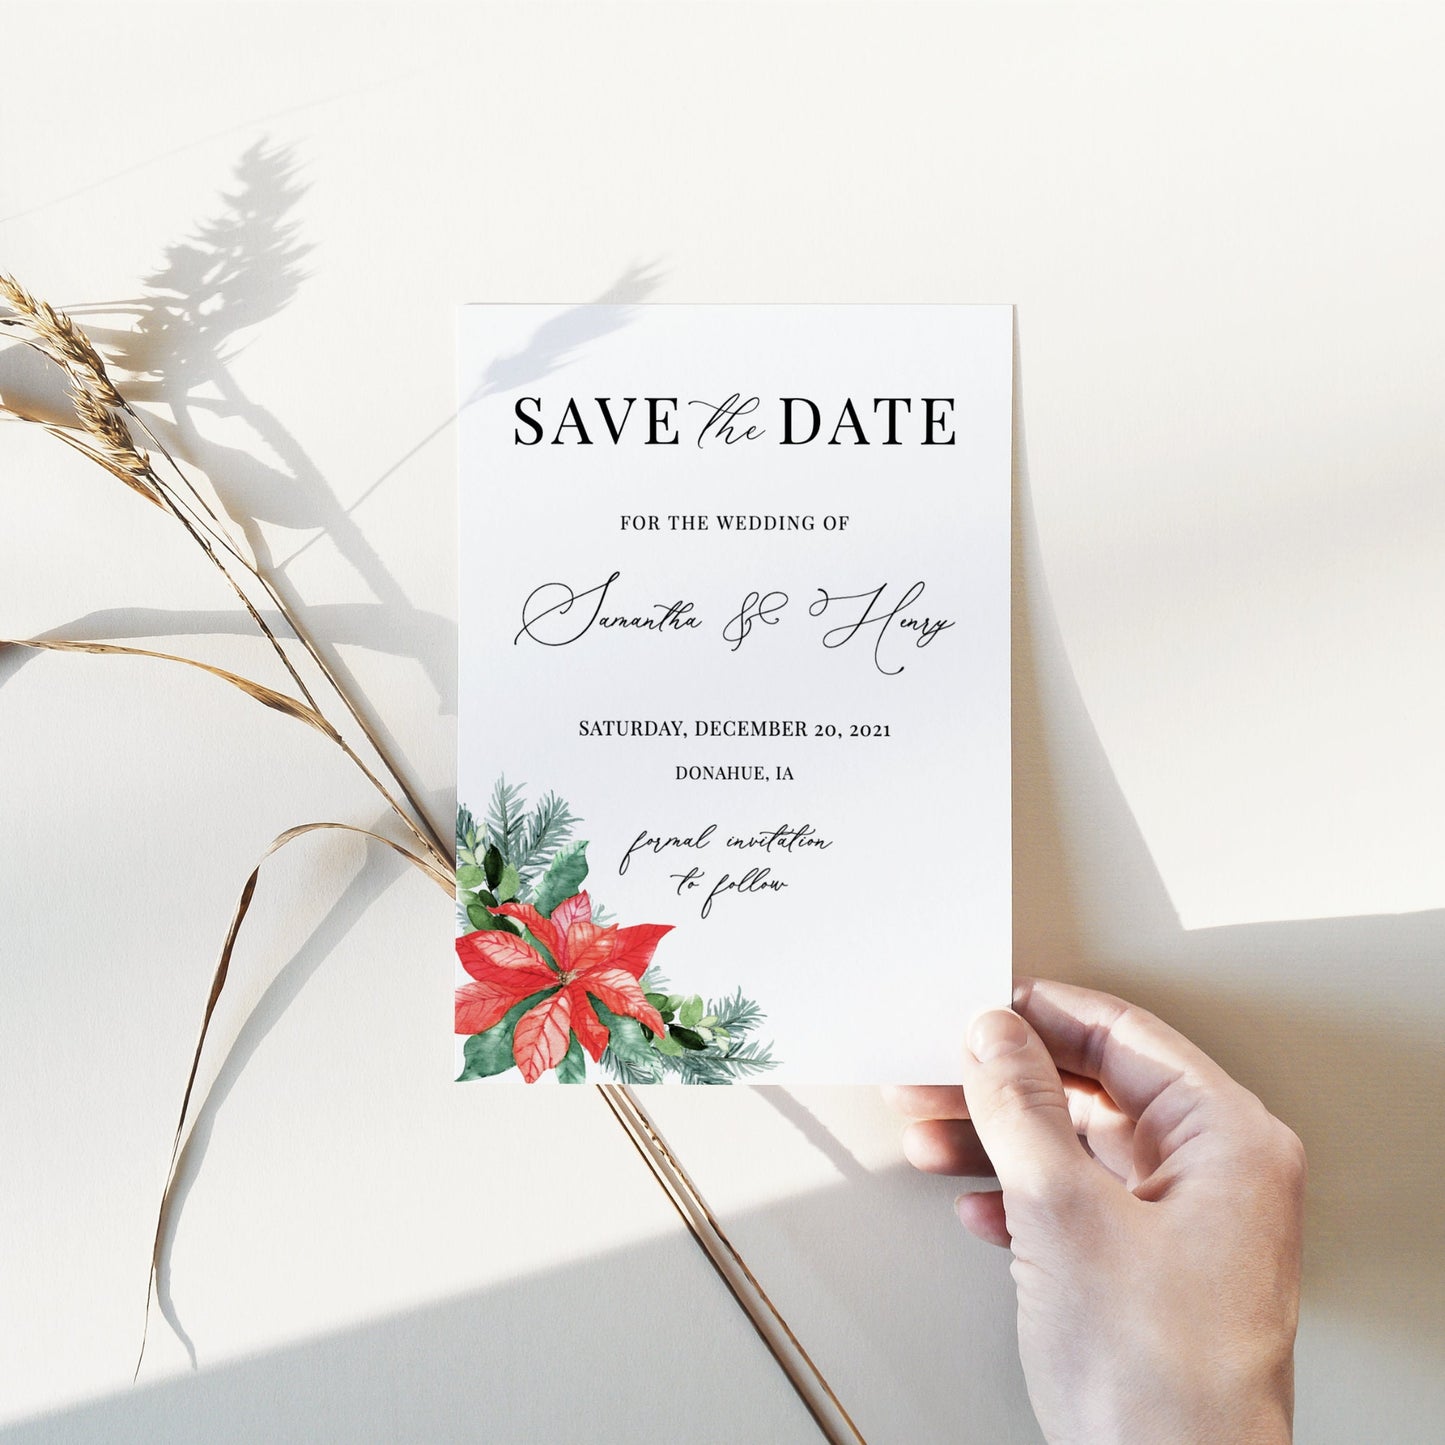 Editable Winter Save the Date Poinsettia Save the Date Cards Wedding Announcement Text Digital Template